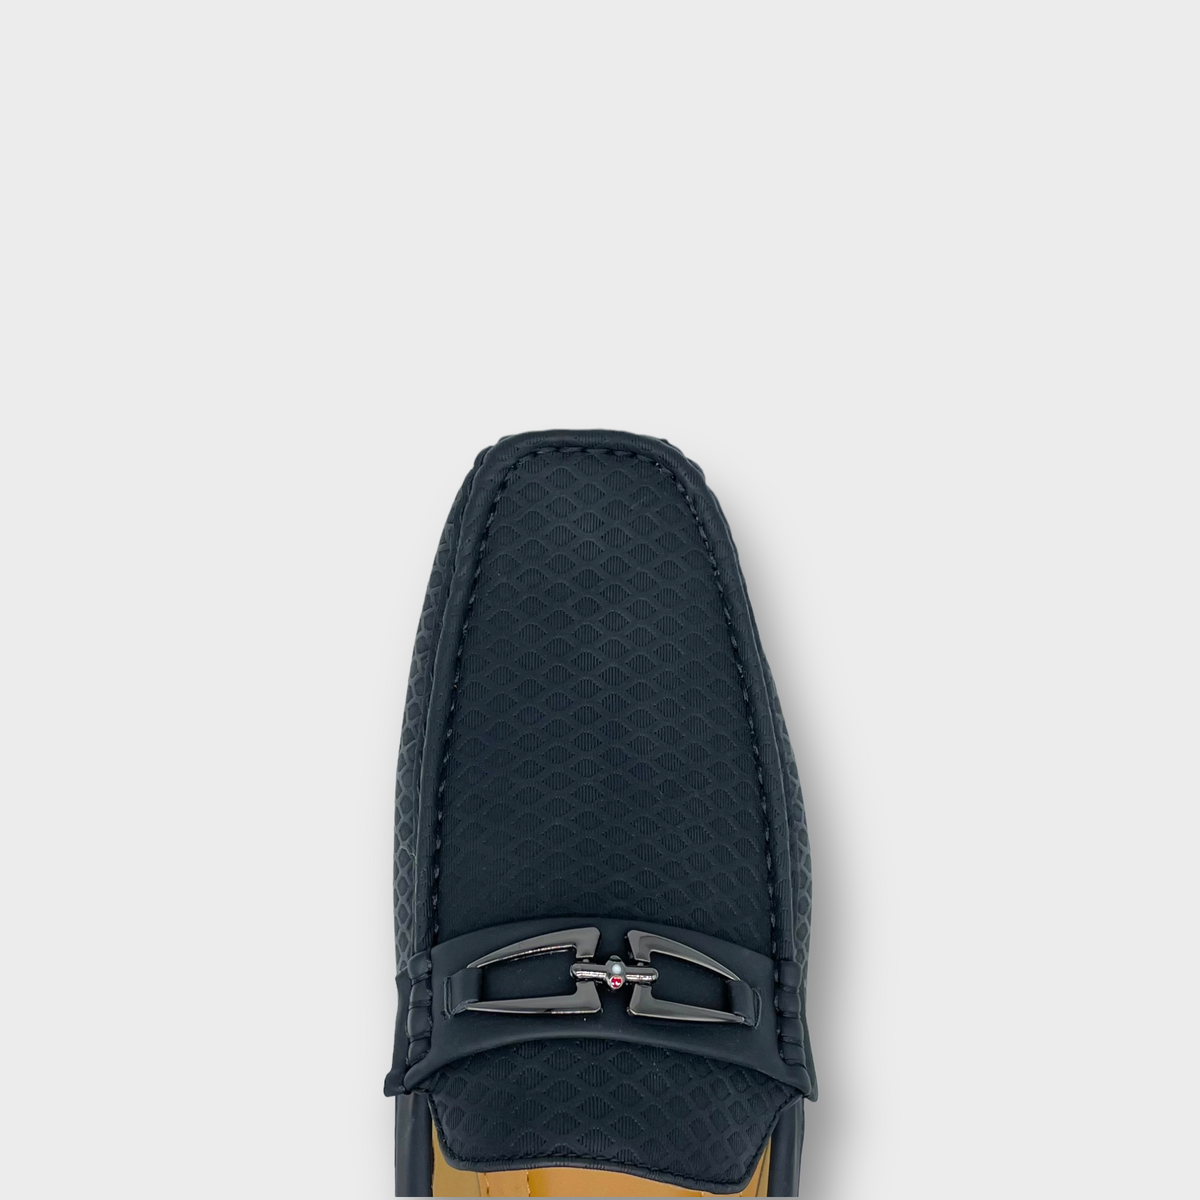 Onyx Black Loafers